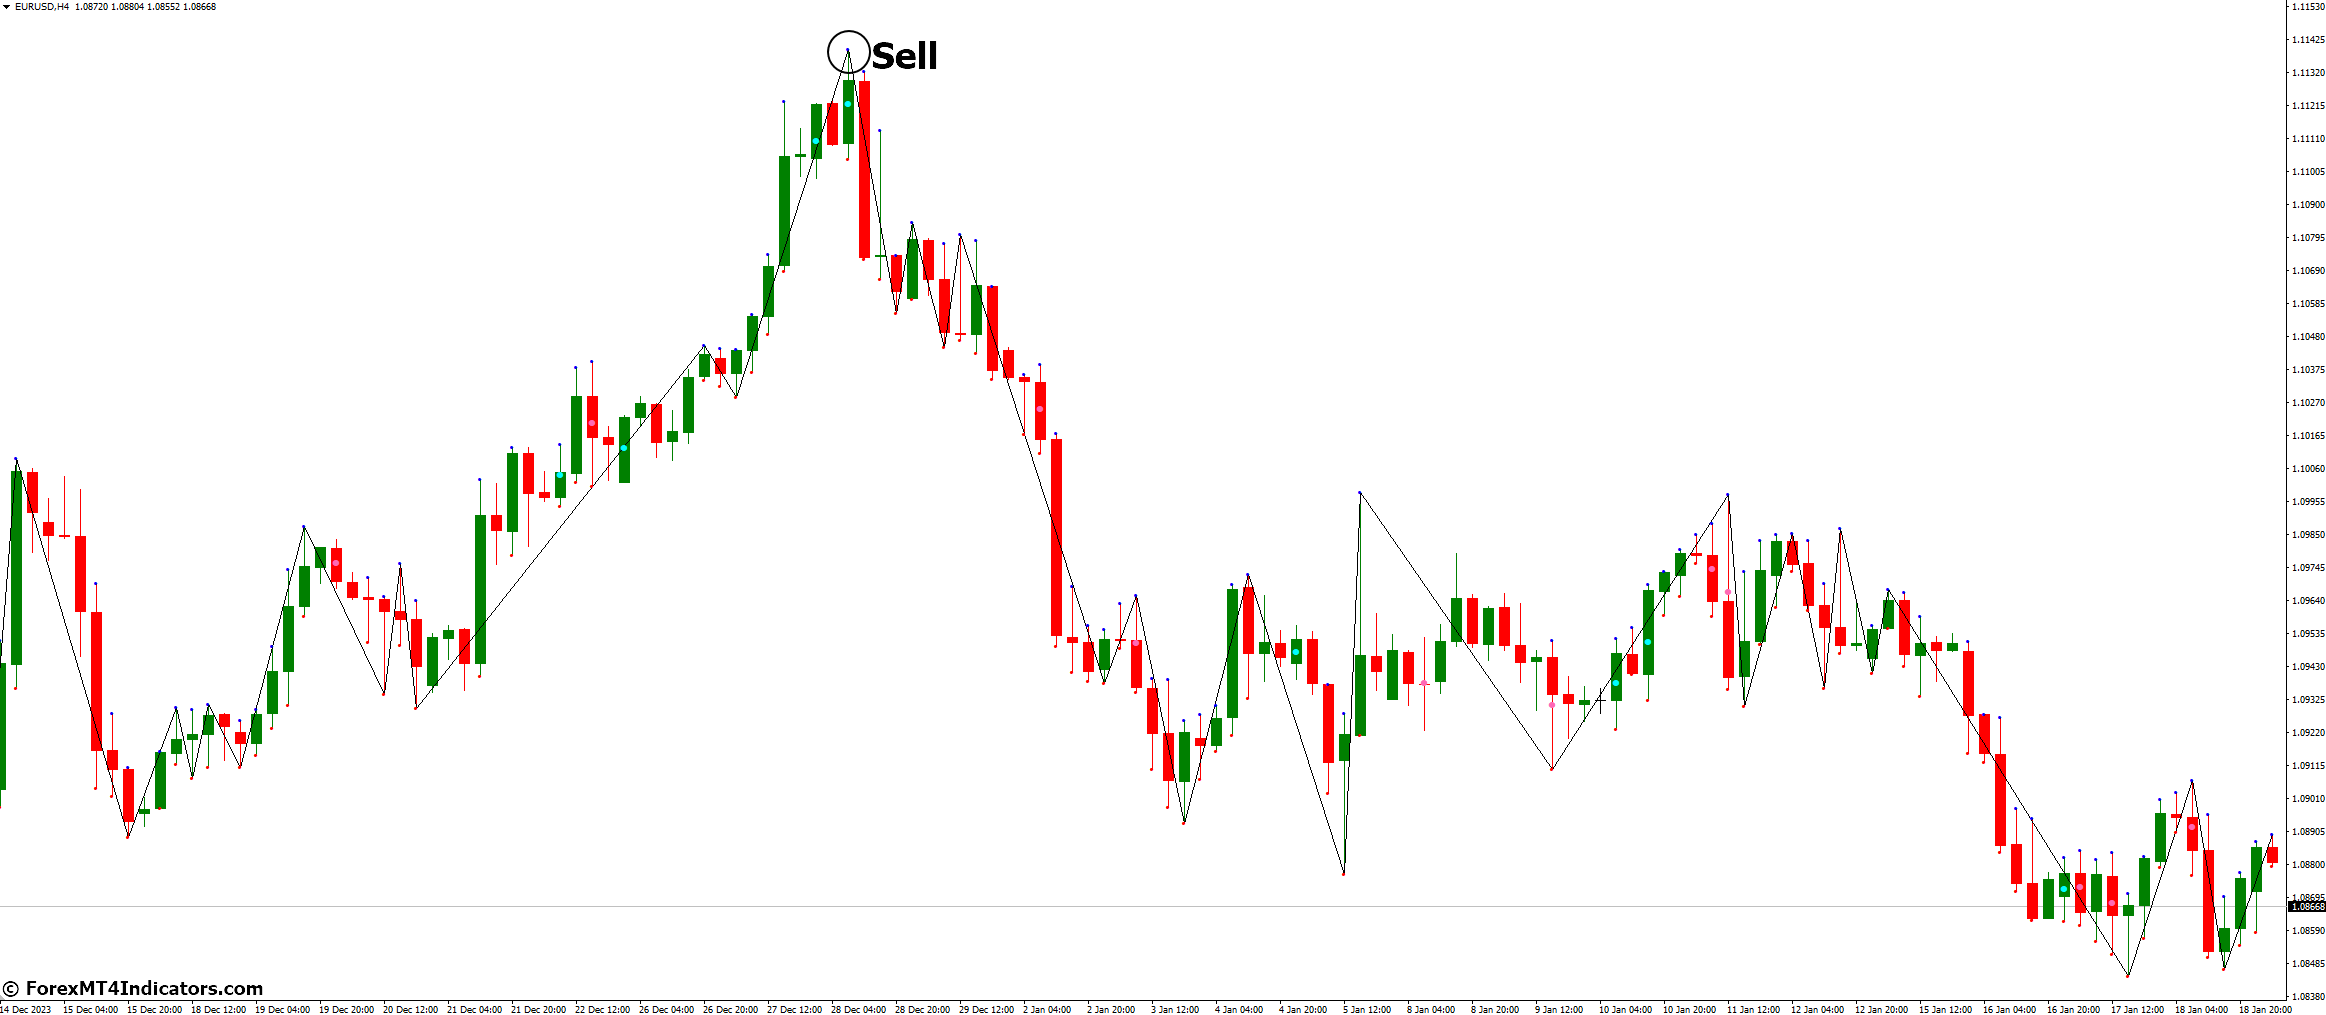 How to Trade with Gann Swings Indicator - Sell Entry